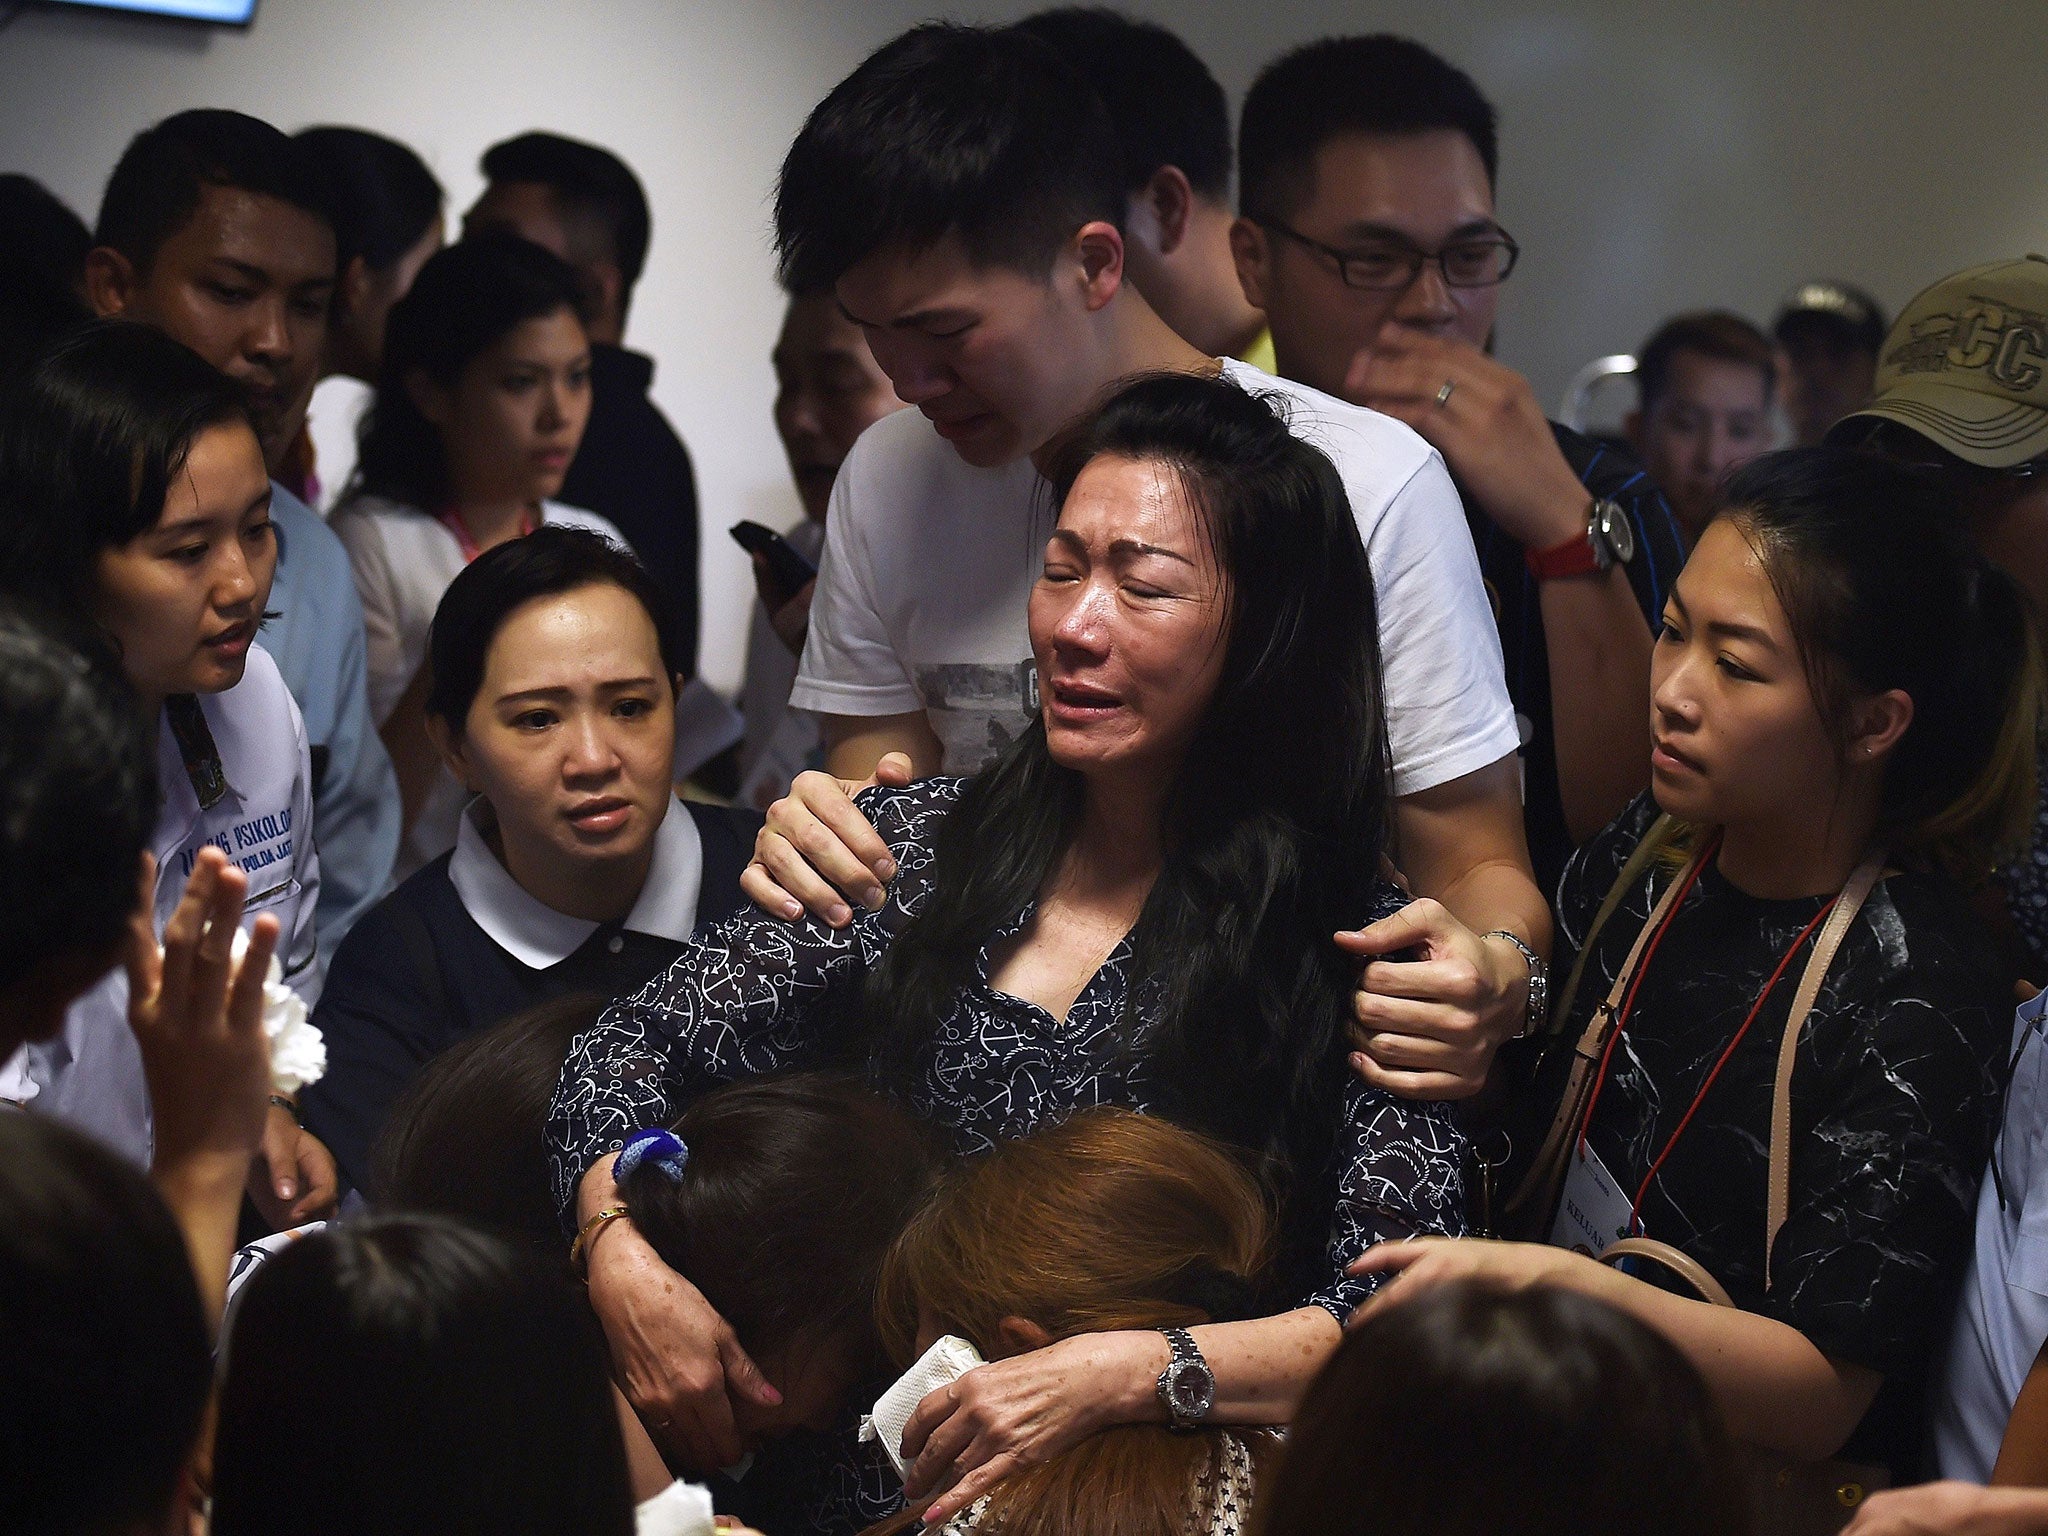 Family members of passengers onboard the missing Malaysian air carrier AirAsia flight QZ8501 react after watching news reports showing an unidentified body floating in the Java sea, inside the crisis-centre set up at Juanda International Airport in Surabaya